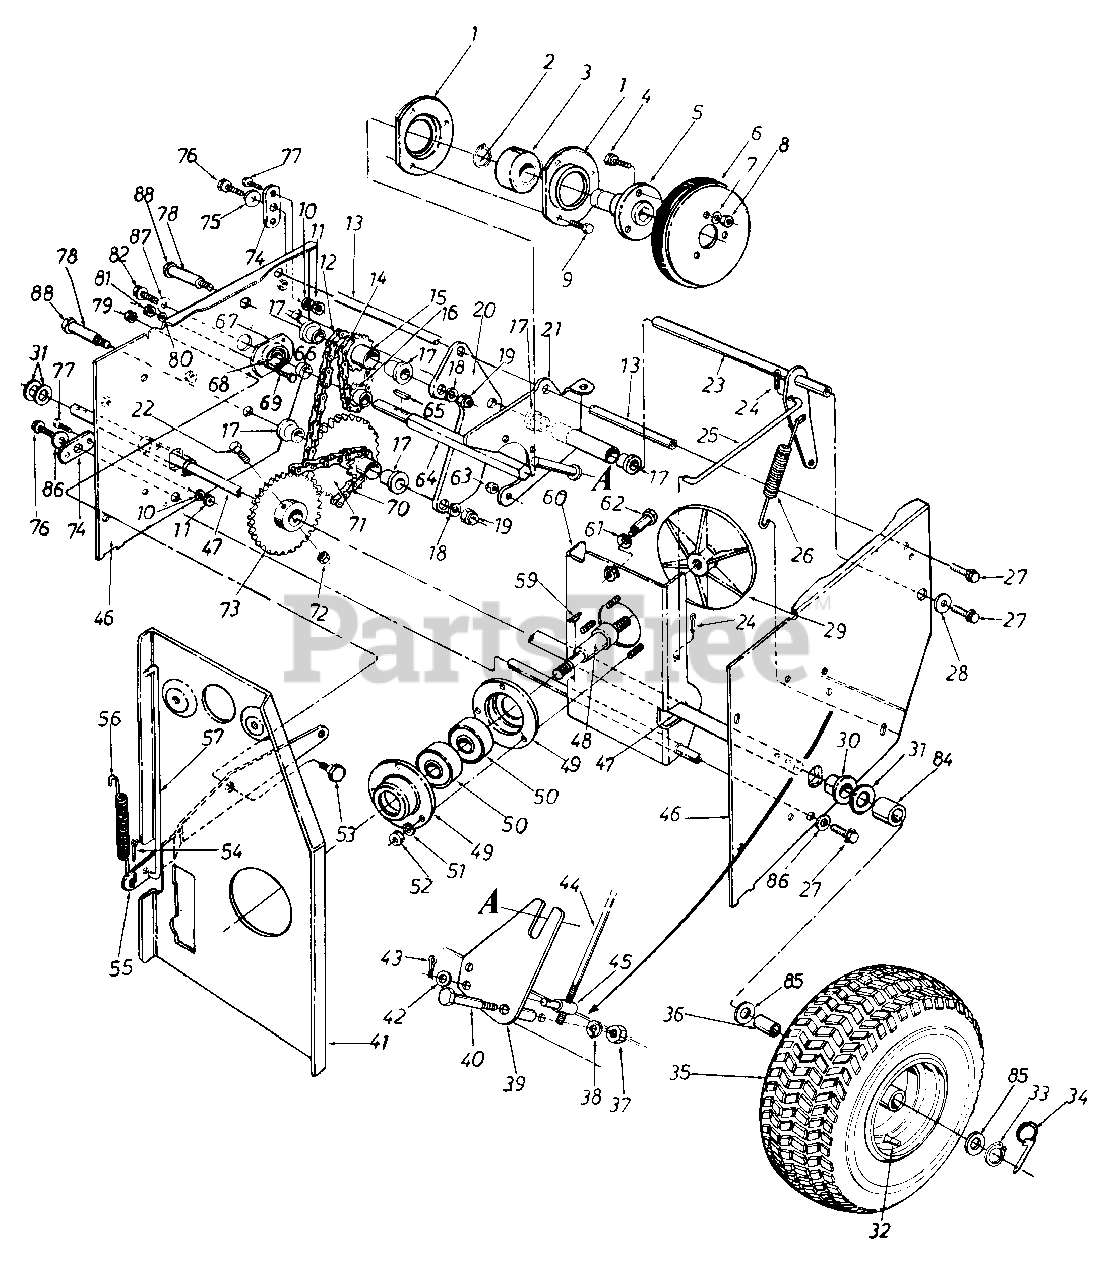 MTD Parts on the Parts Diagram for 149-852-023 - MTD Snow ...